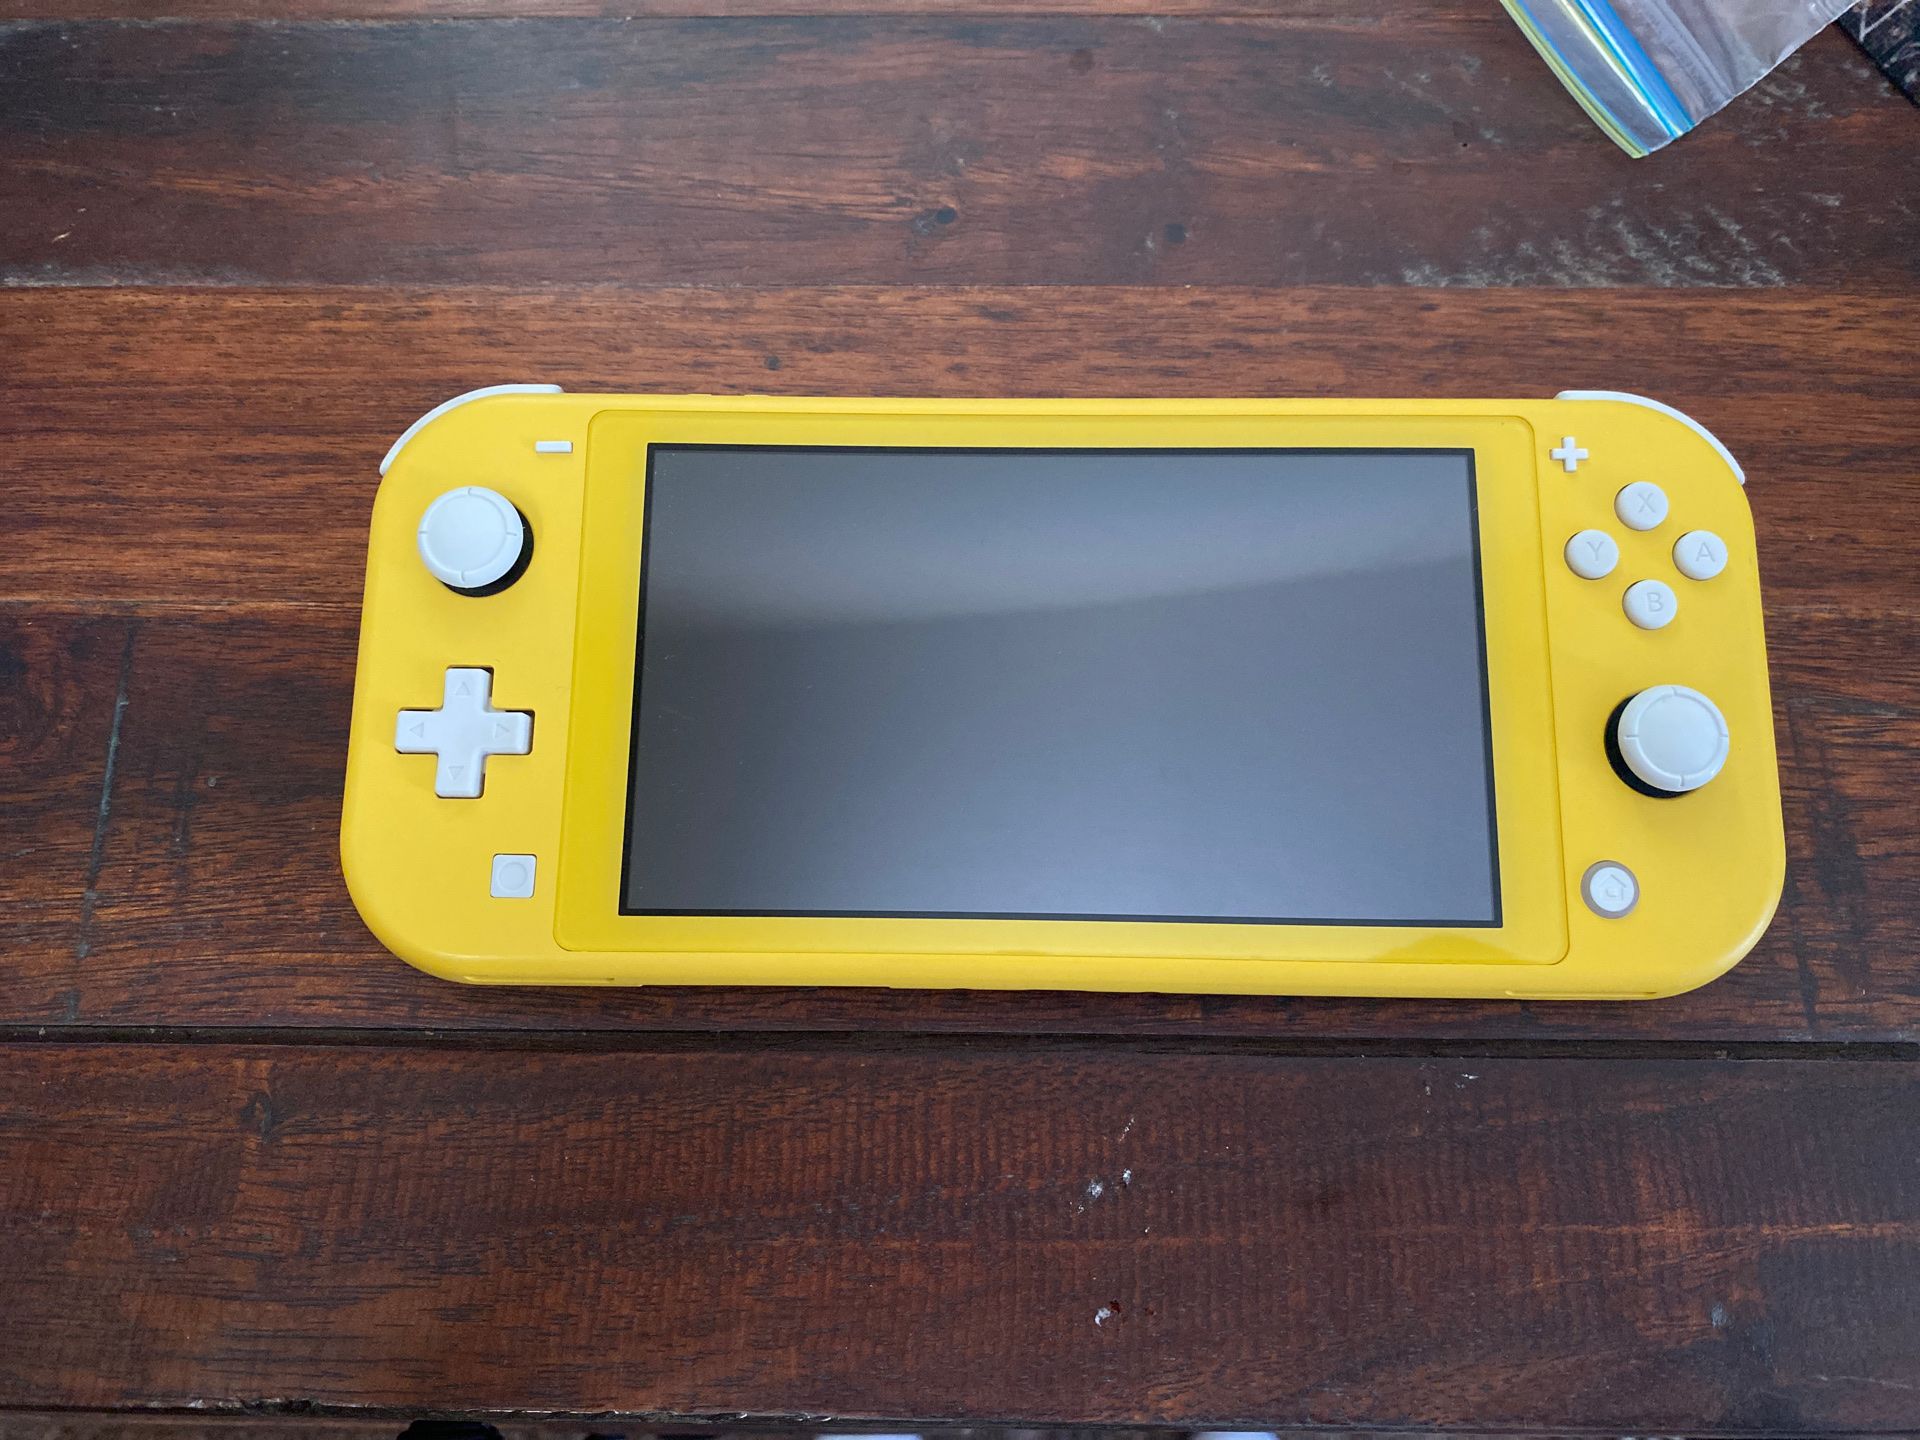 NITENDO SWITCH LITE : NEW/ ONLY USED A FEW TIMES/ POKÉMON GAME AND CHARGER INCLUDES/ SANITIZED AND READY FOR USE